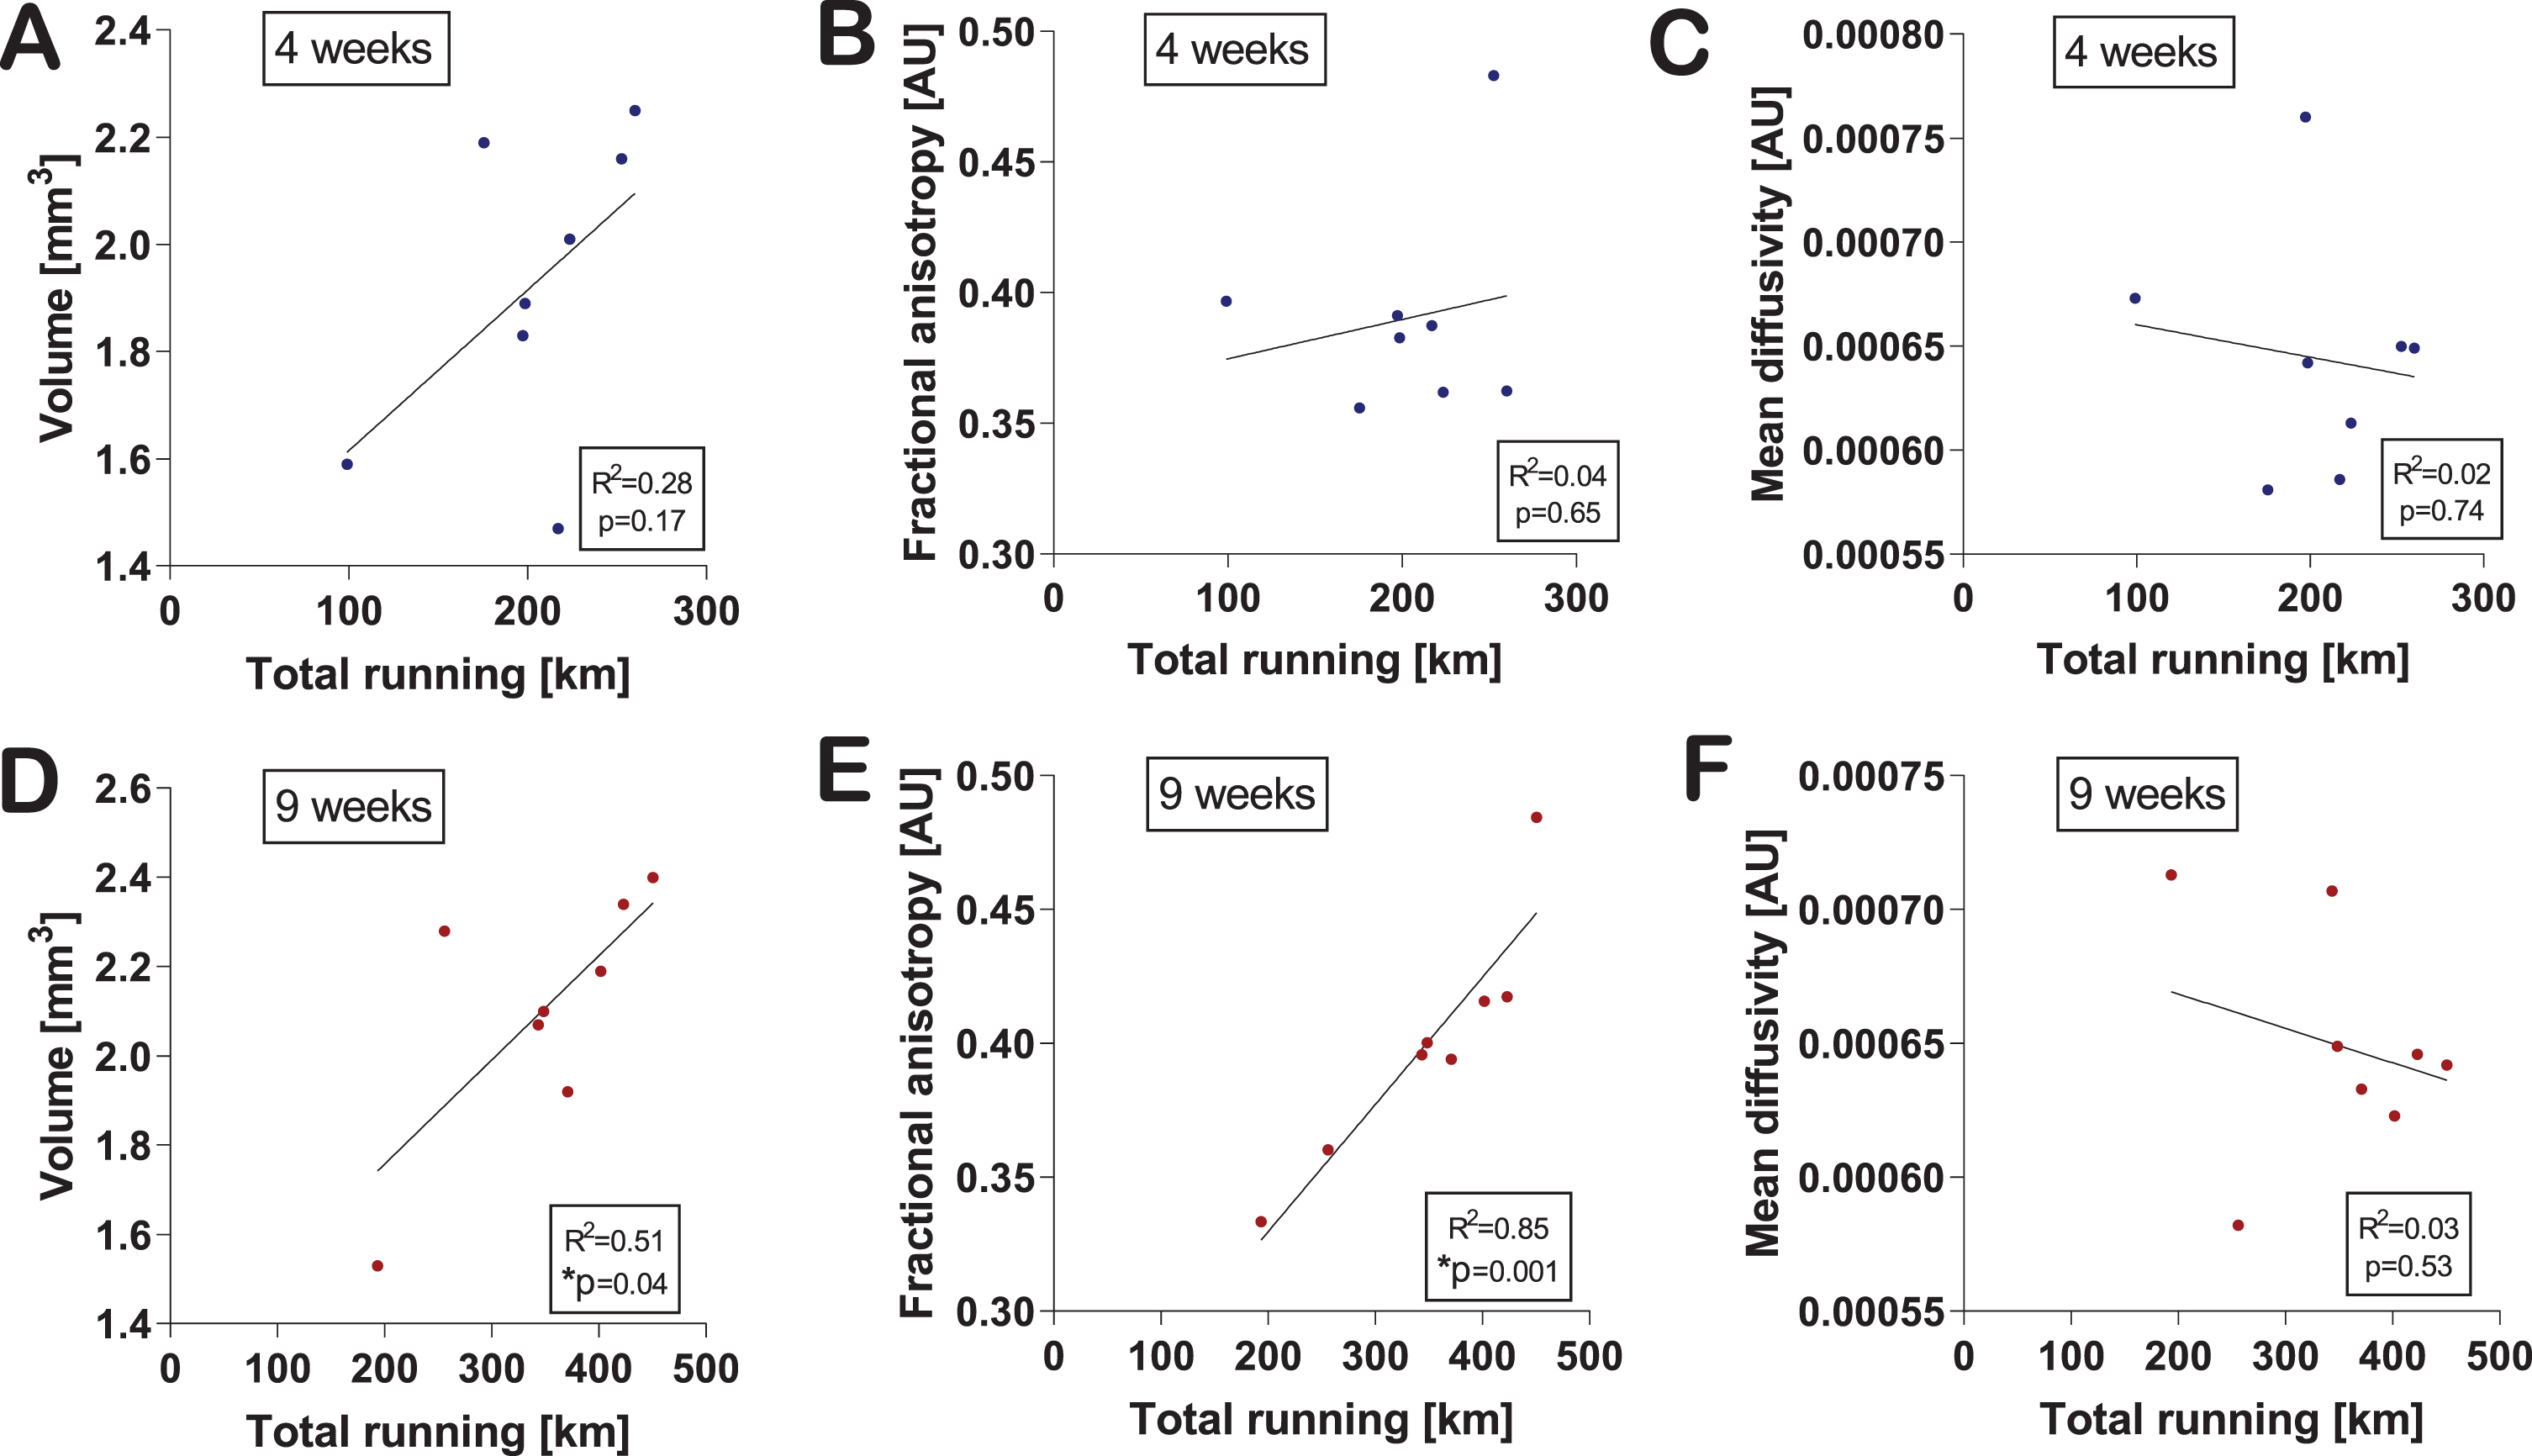 Changes in hippocampal volume and microstructure correlate with exercise level. Correlations of hippocampal volume (A), fractional anisotropy (B), and mean diffusivity (C) with the total amount of running at four weeks were calculated using the two-tailed Pearson correlation test. An individual dot represents one mouse. Data are expressed as mean ± SEM. Correlations of hippocampal volume (D), FA (E), and MD (F) with the total amount of running at nine weeks were calculated using the two-tailed Pearson correlation test. An individual dot represents one mouse. Data are expressed as mean ± SEM. Asterisks highlight significant correlations (*p < 0.05).